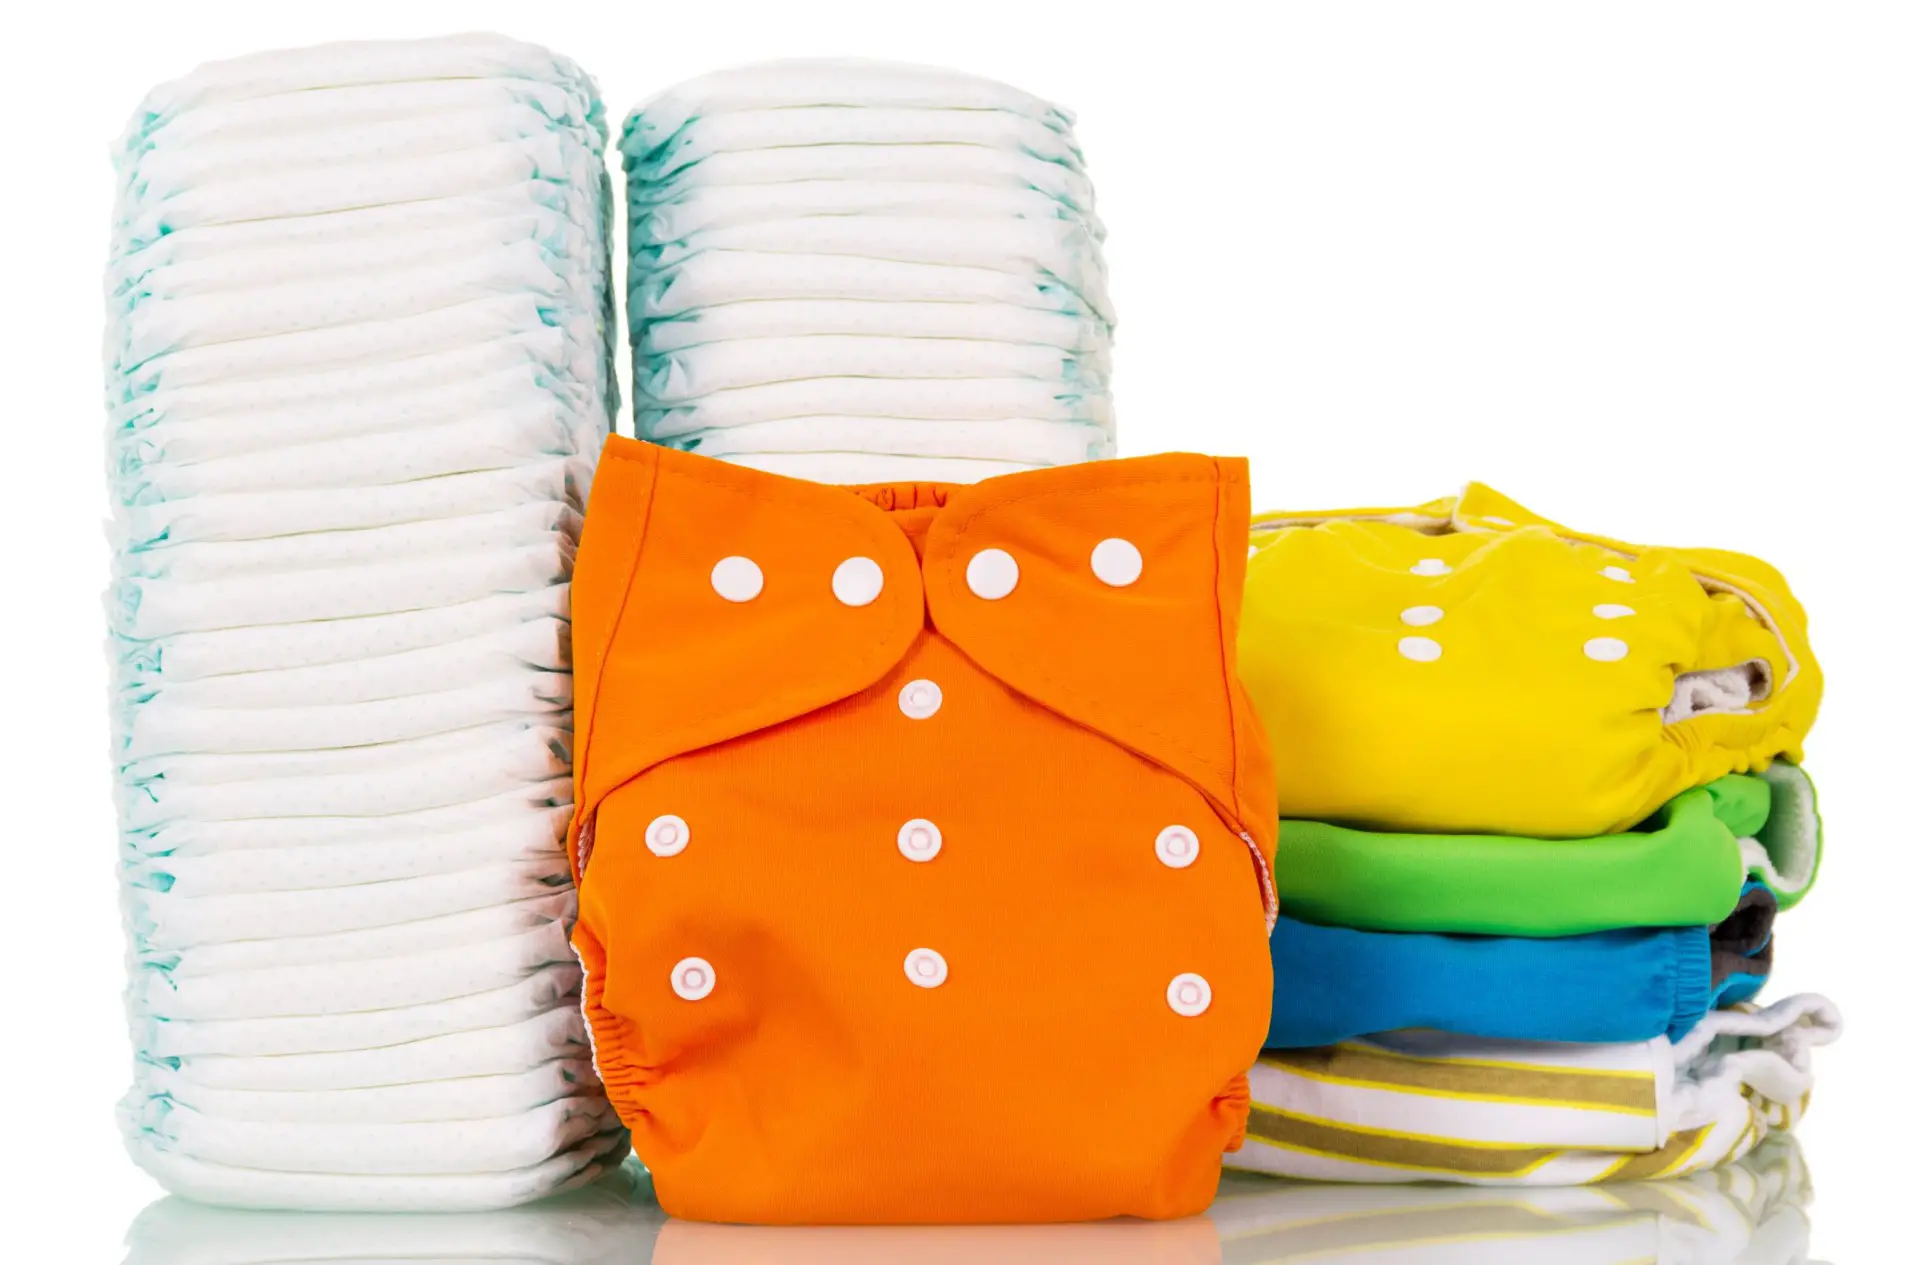 The 5 Best Eco-Friendly Diapers (Reusable or Disposable)